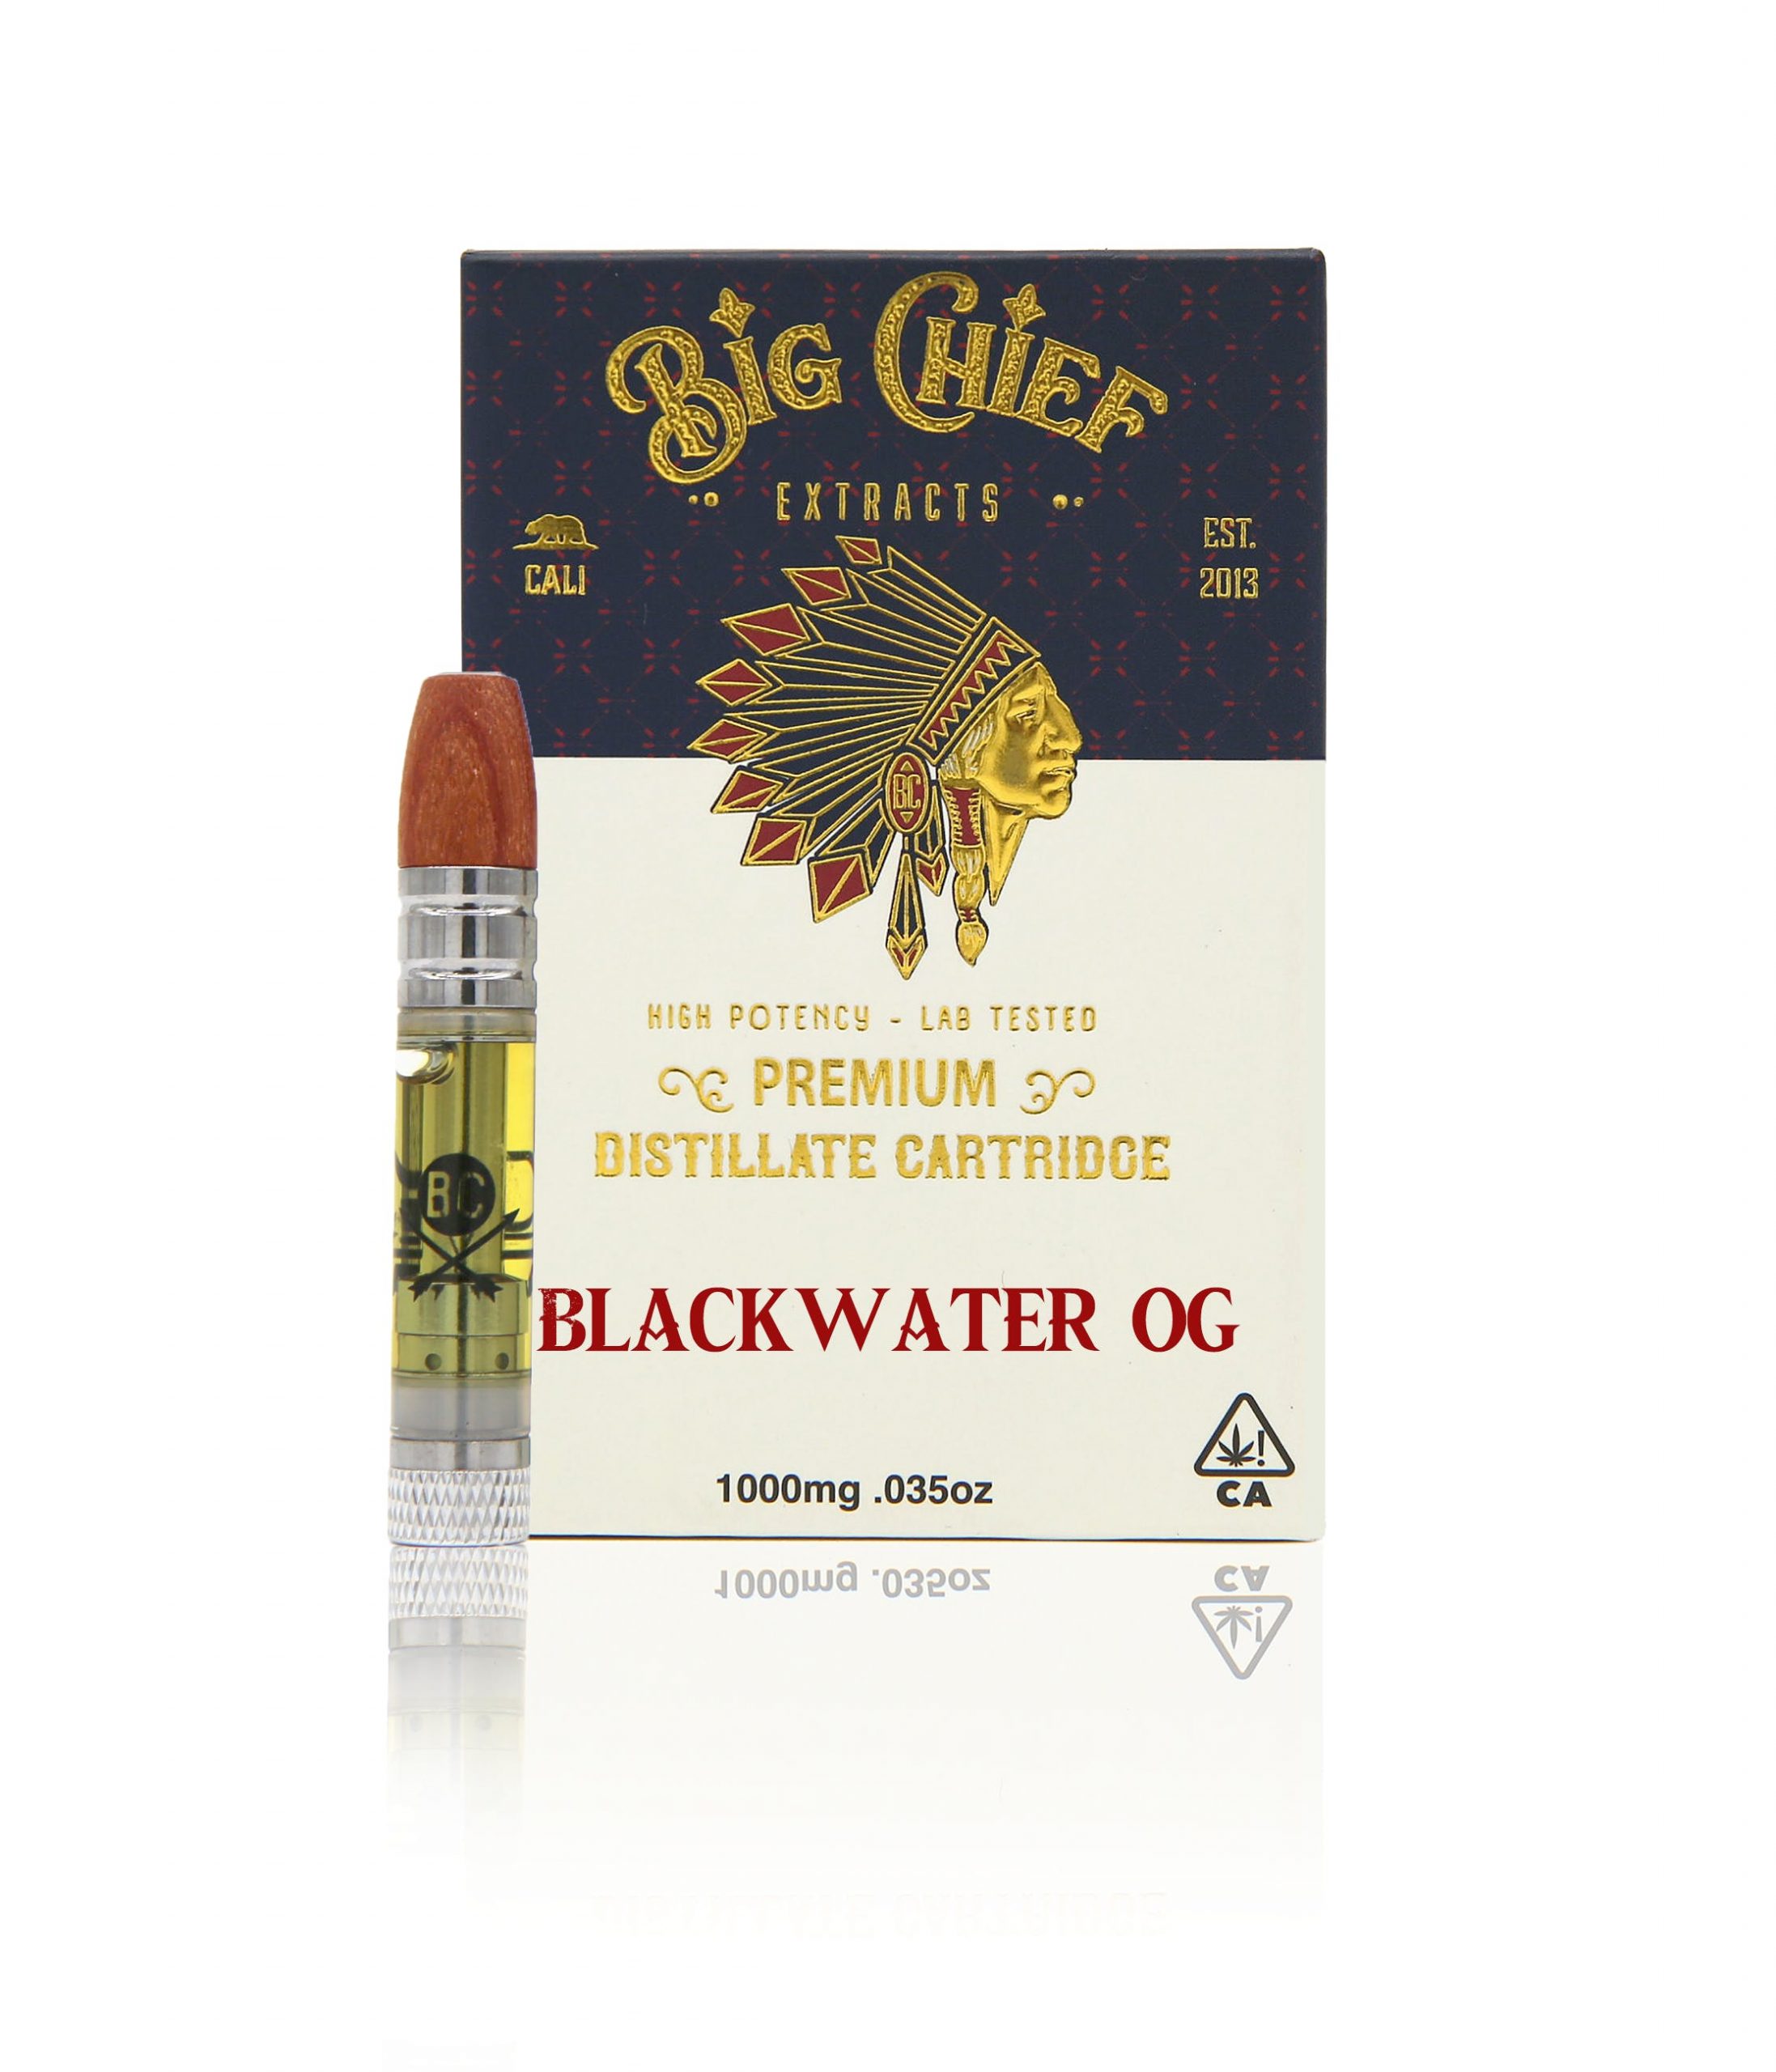 Big Chief Extracts Blackwater OgBig Chief Extracts Blackwater Og